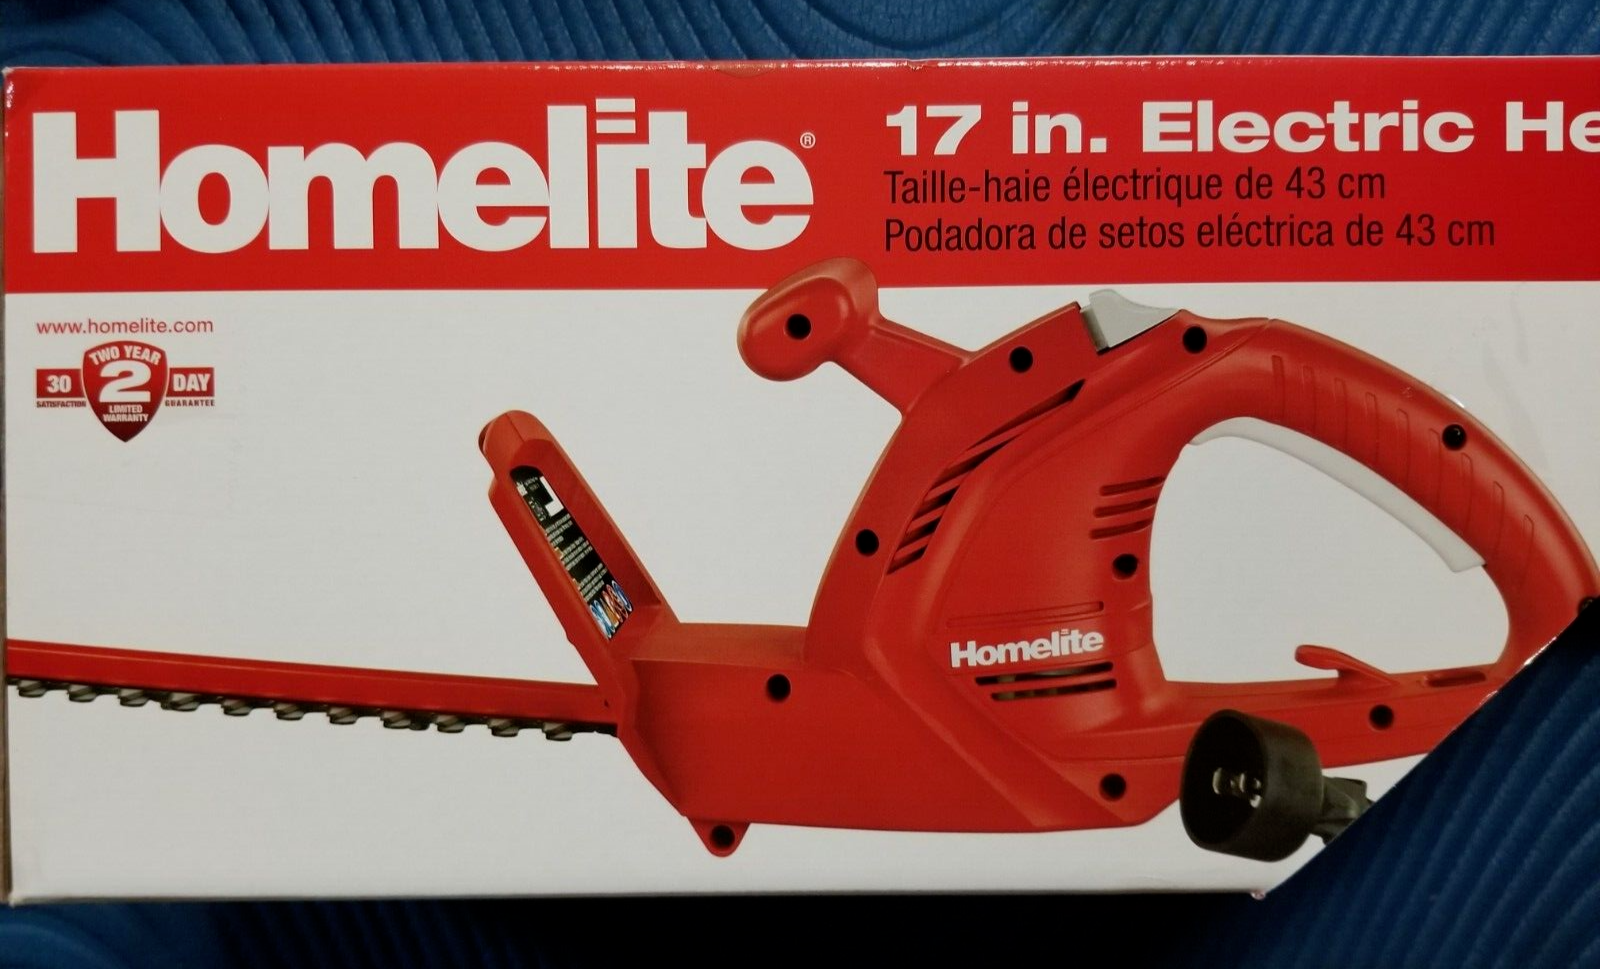 Homelite  17 in. 2.7 Amp Electric Hedge-Trimmer BRAND NEW!